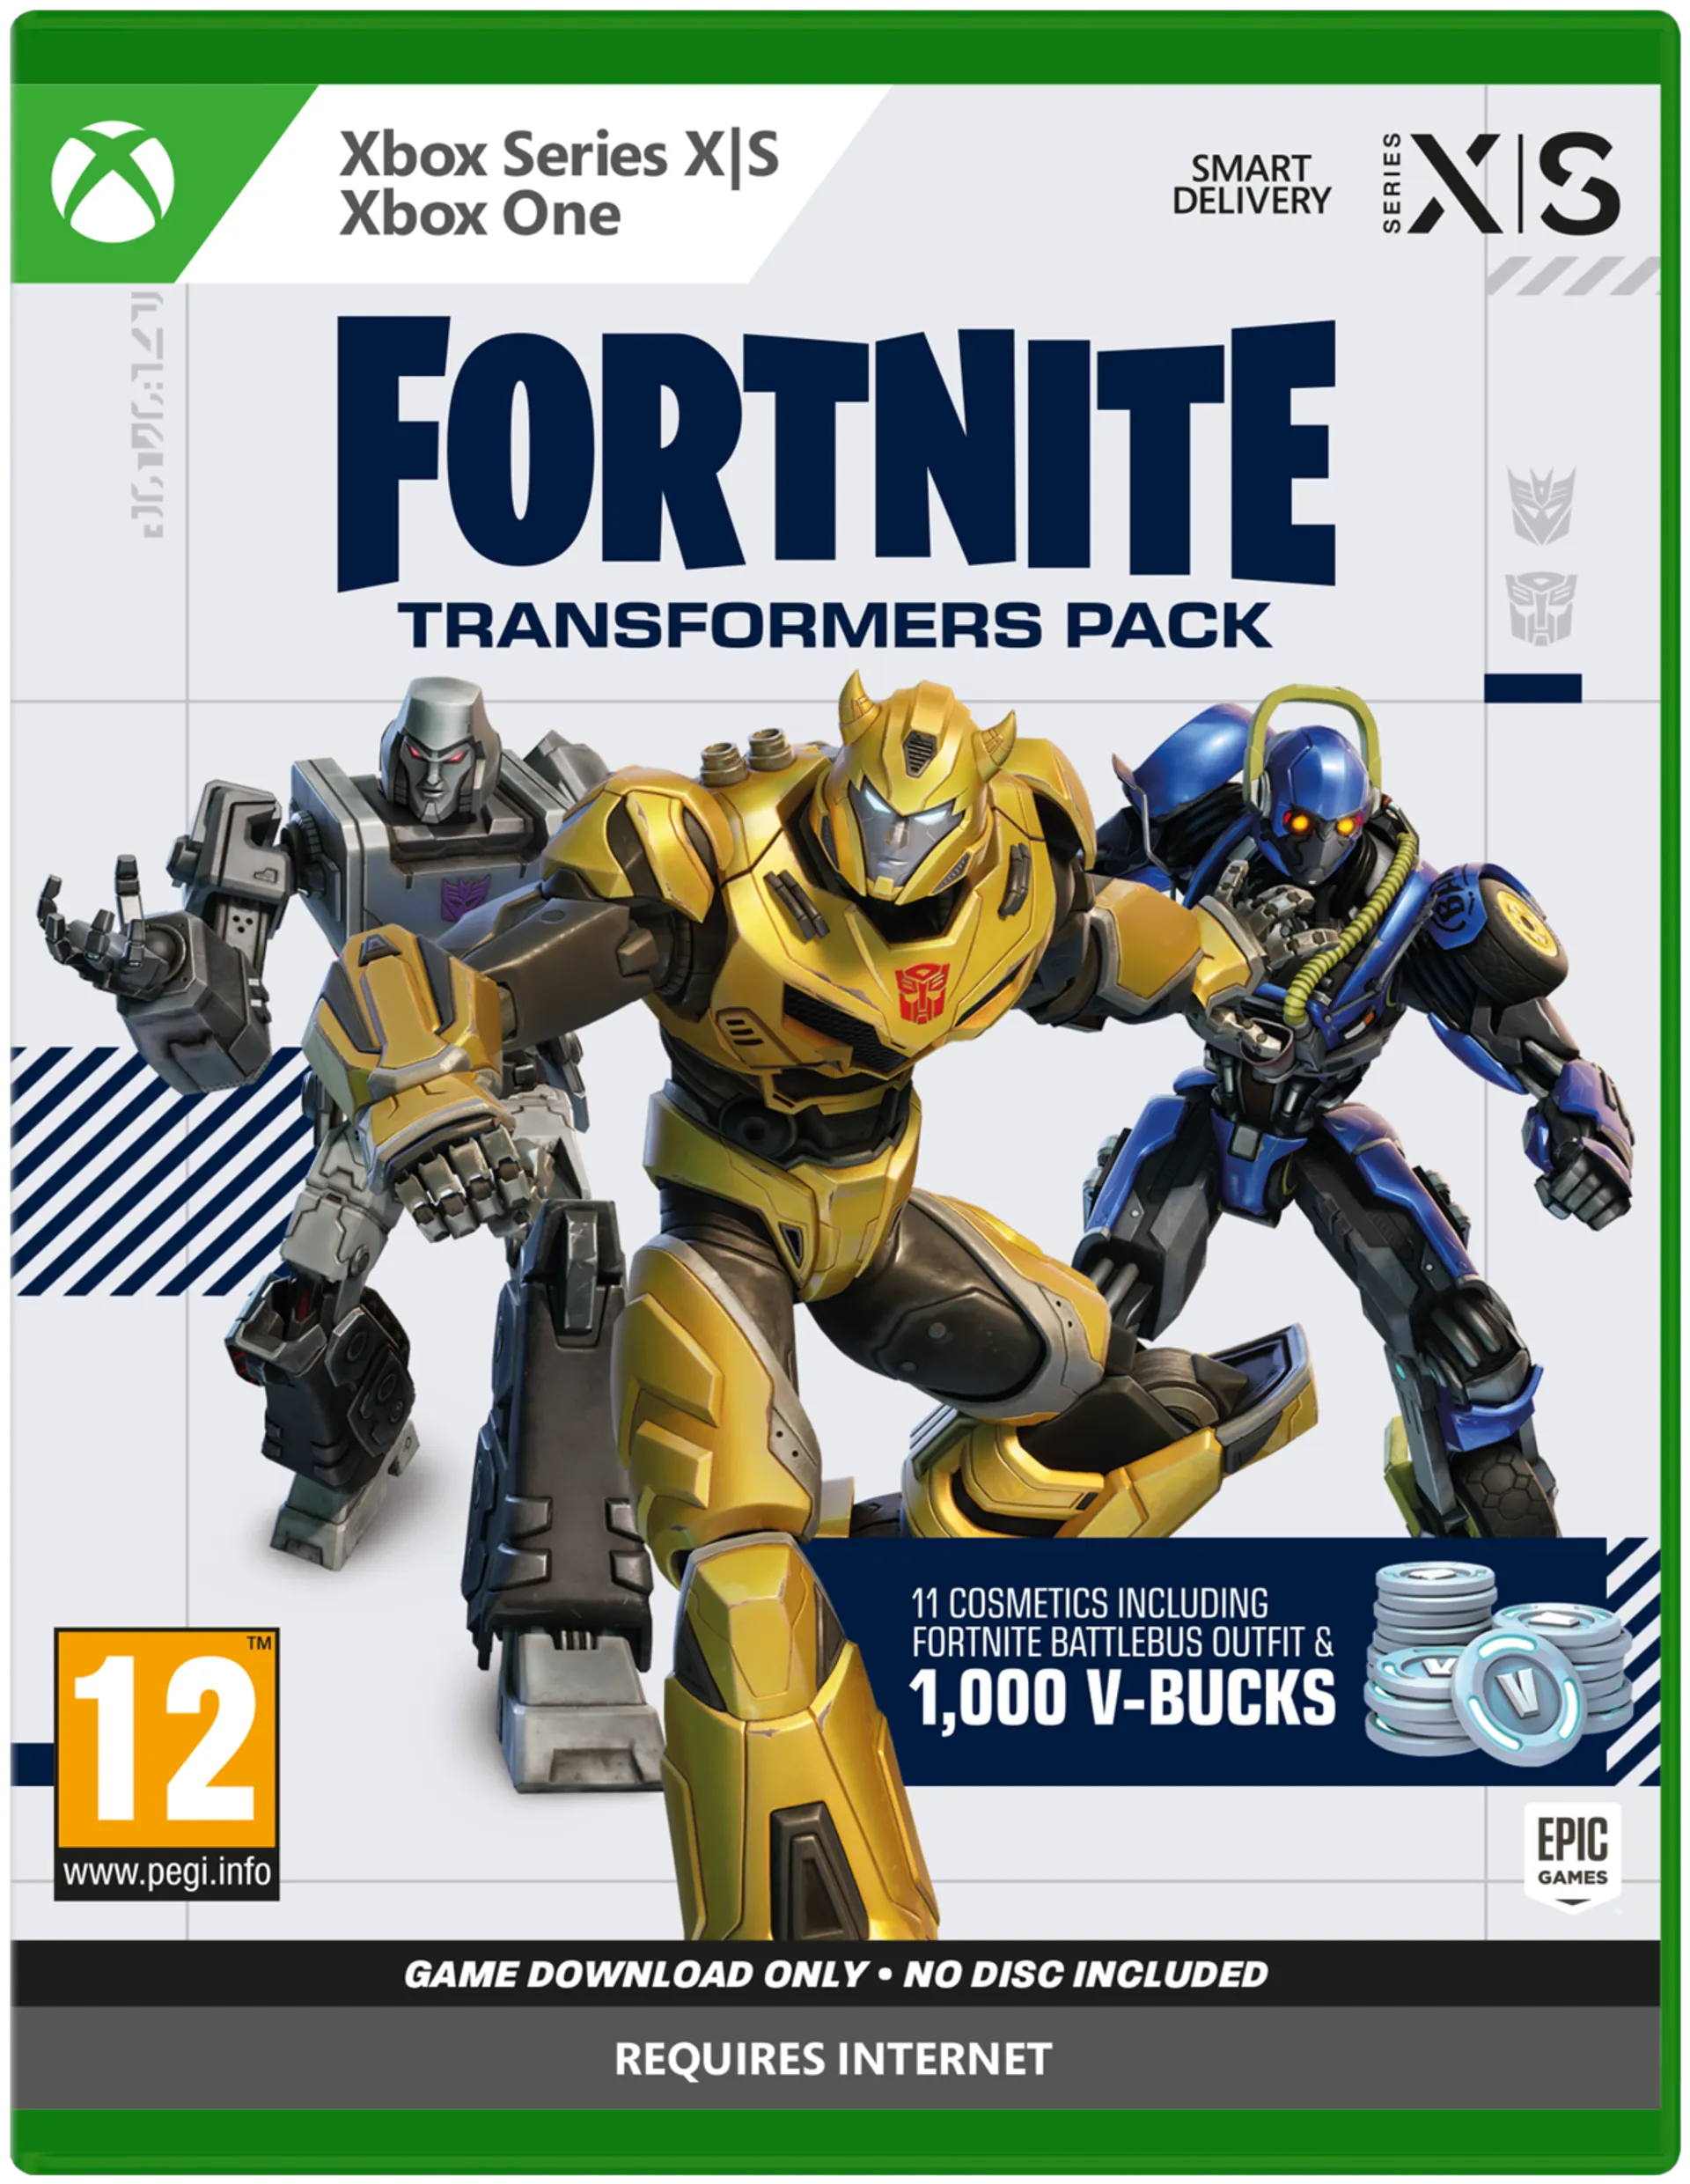 XBXS Fortnite Transformers Pack